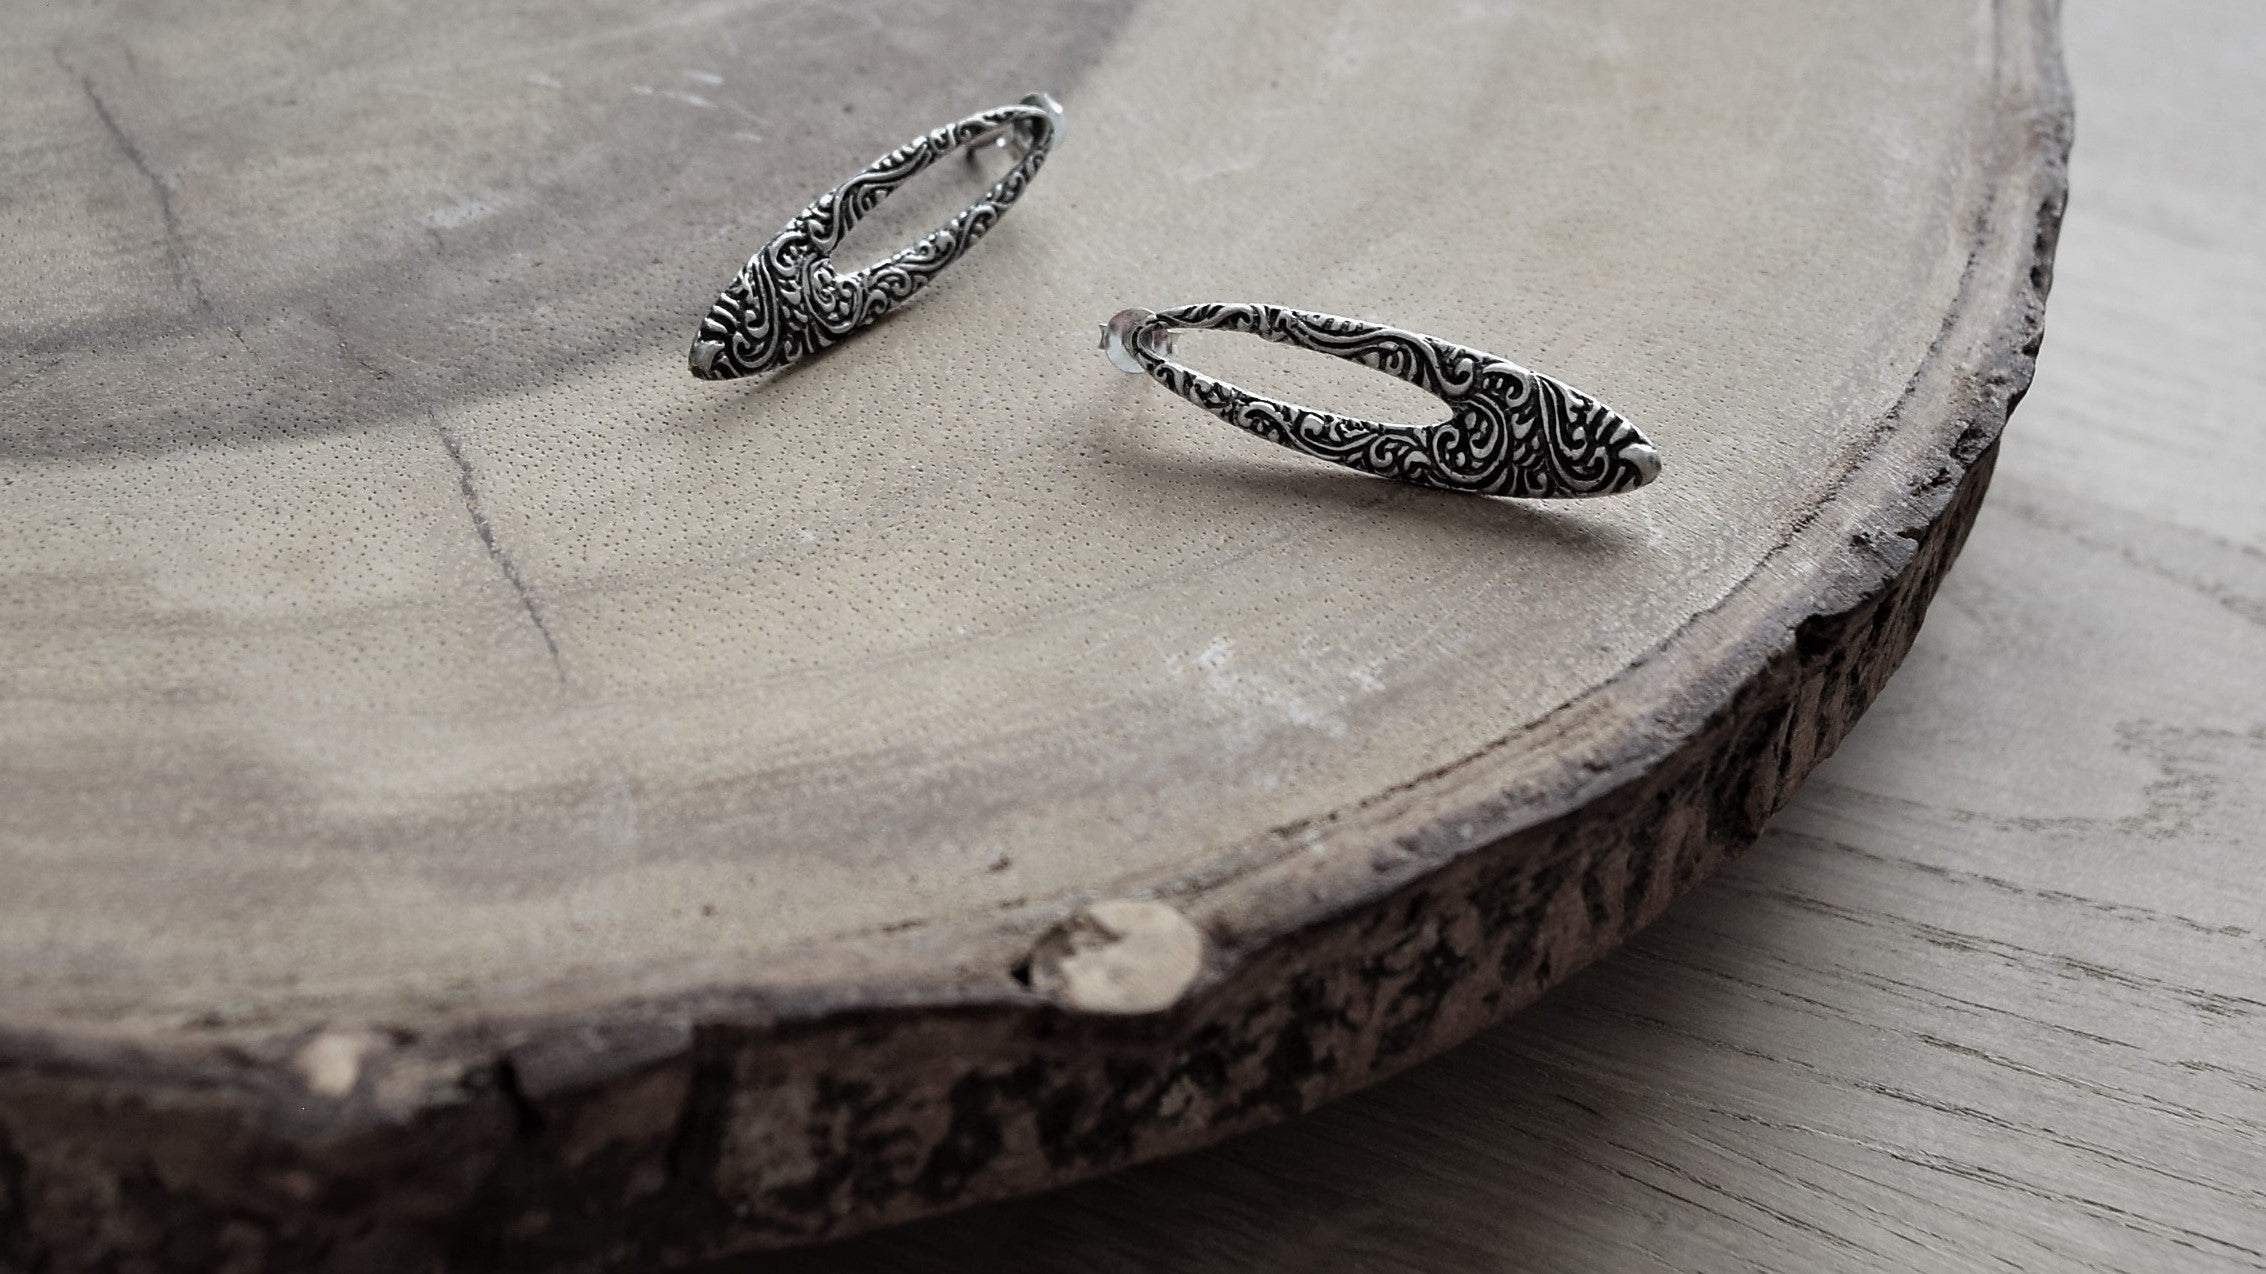 Shop online for gift for Chinese New Year and Valentine's Day: simple elegant oval shaped silver earrings with intricate patterns designed in Singapore, handmade in Bali.